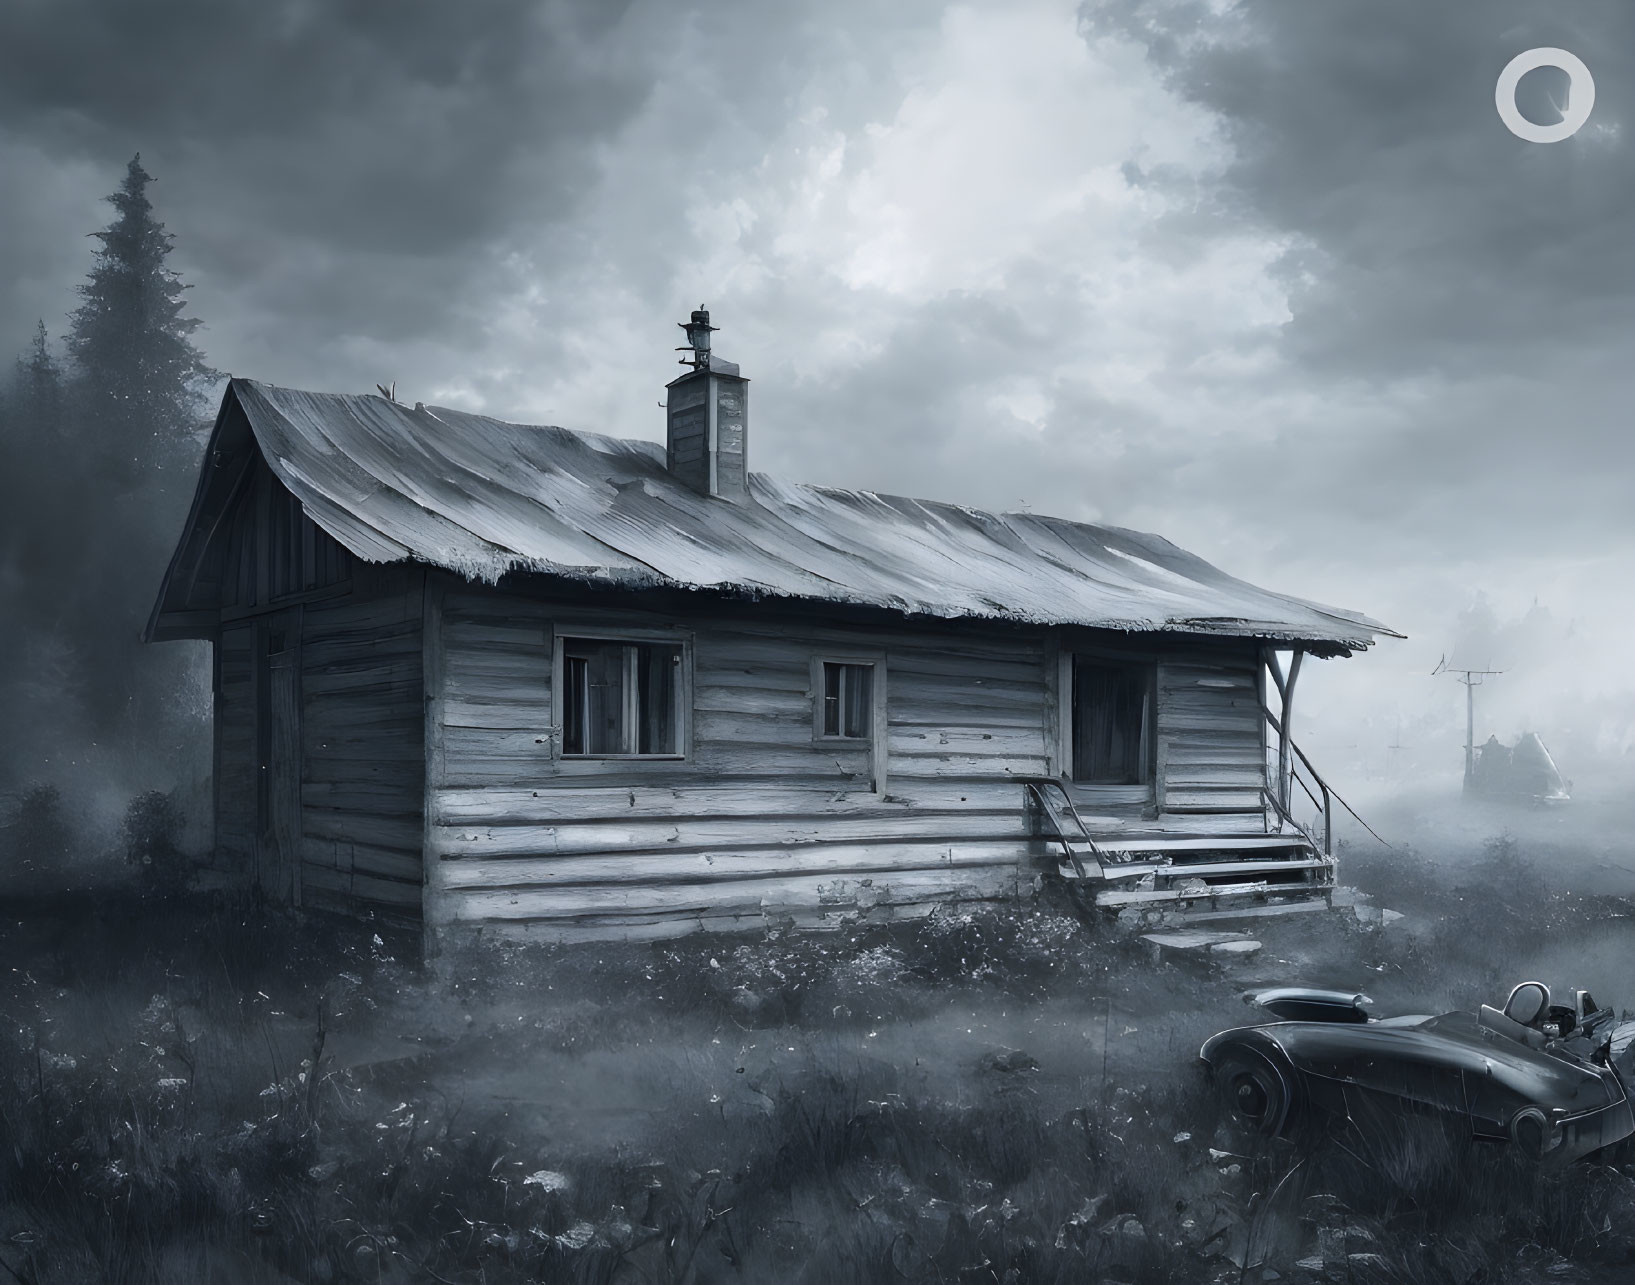 Abandoned wooden cabin and vintage car in misty field